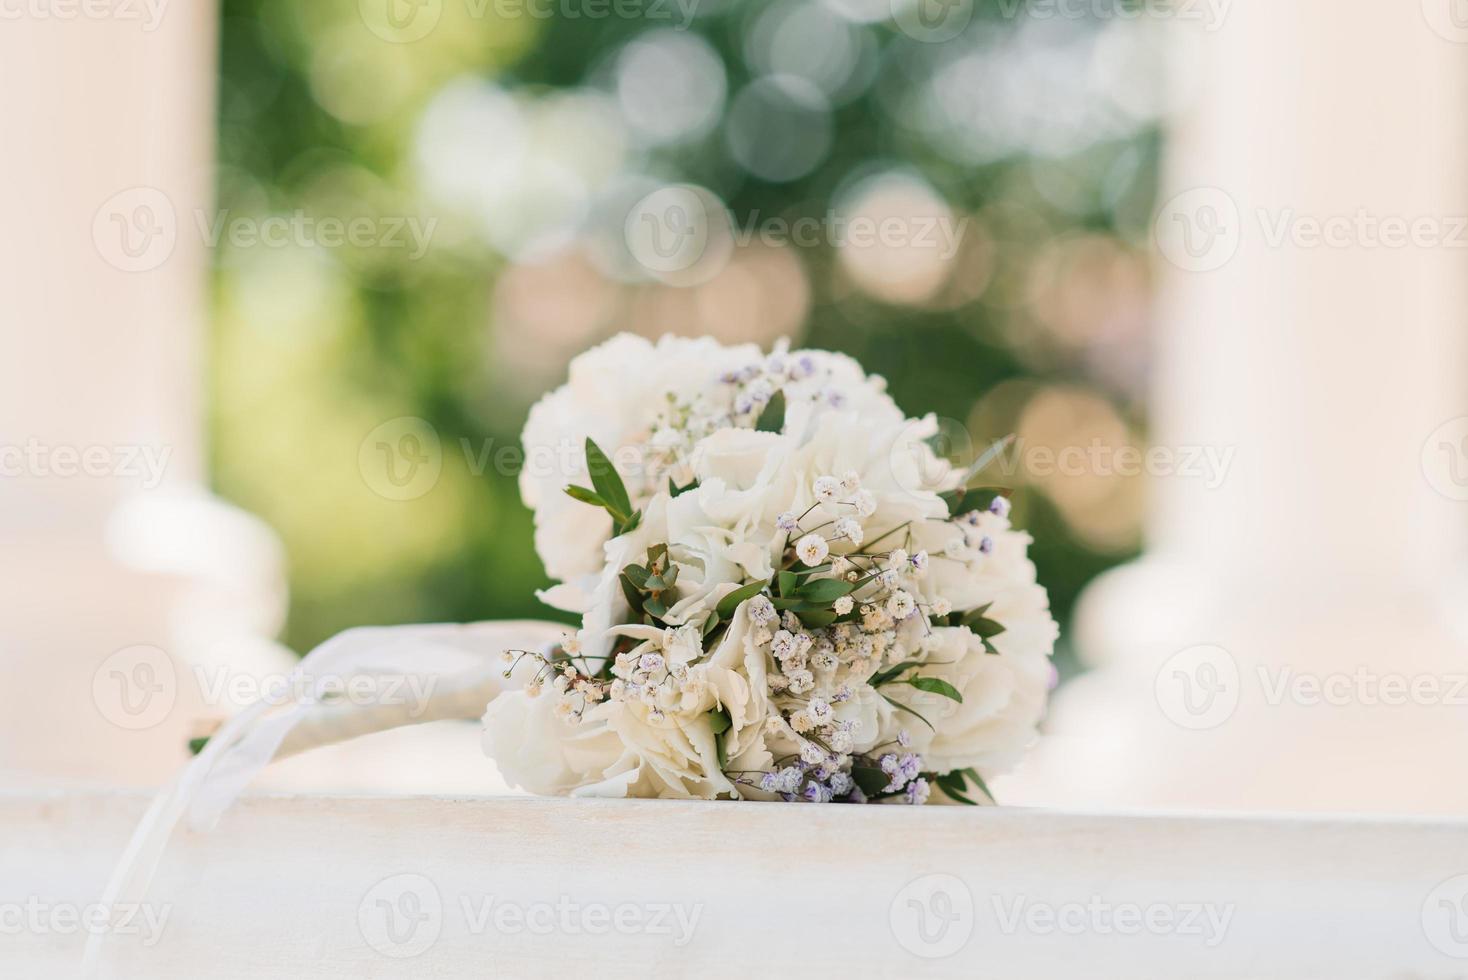 Delicate wedding bouquet with white hydrangea and greenery close-up photo